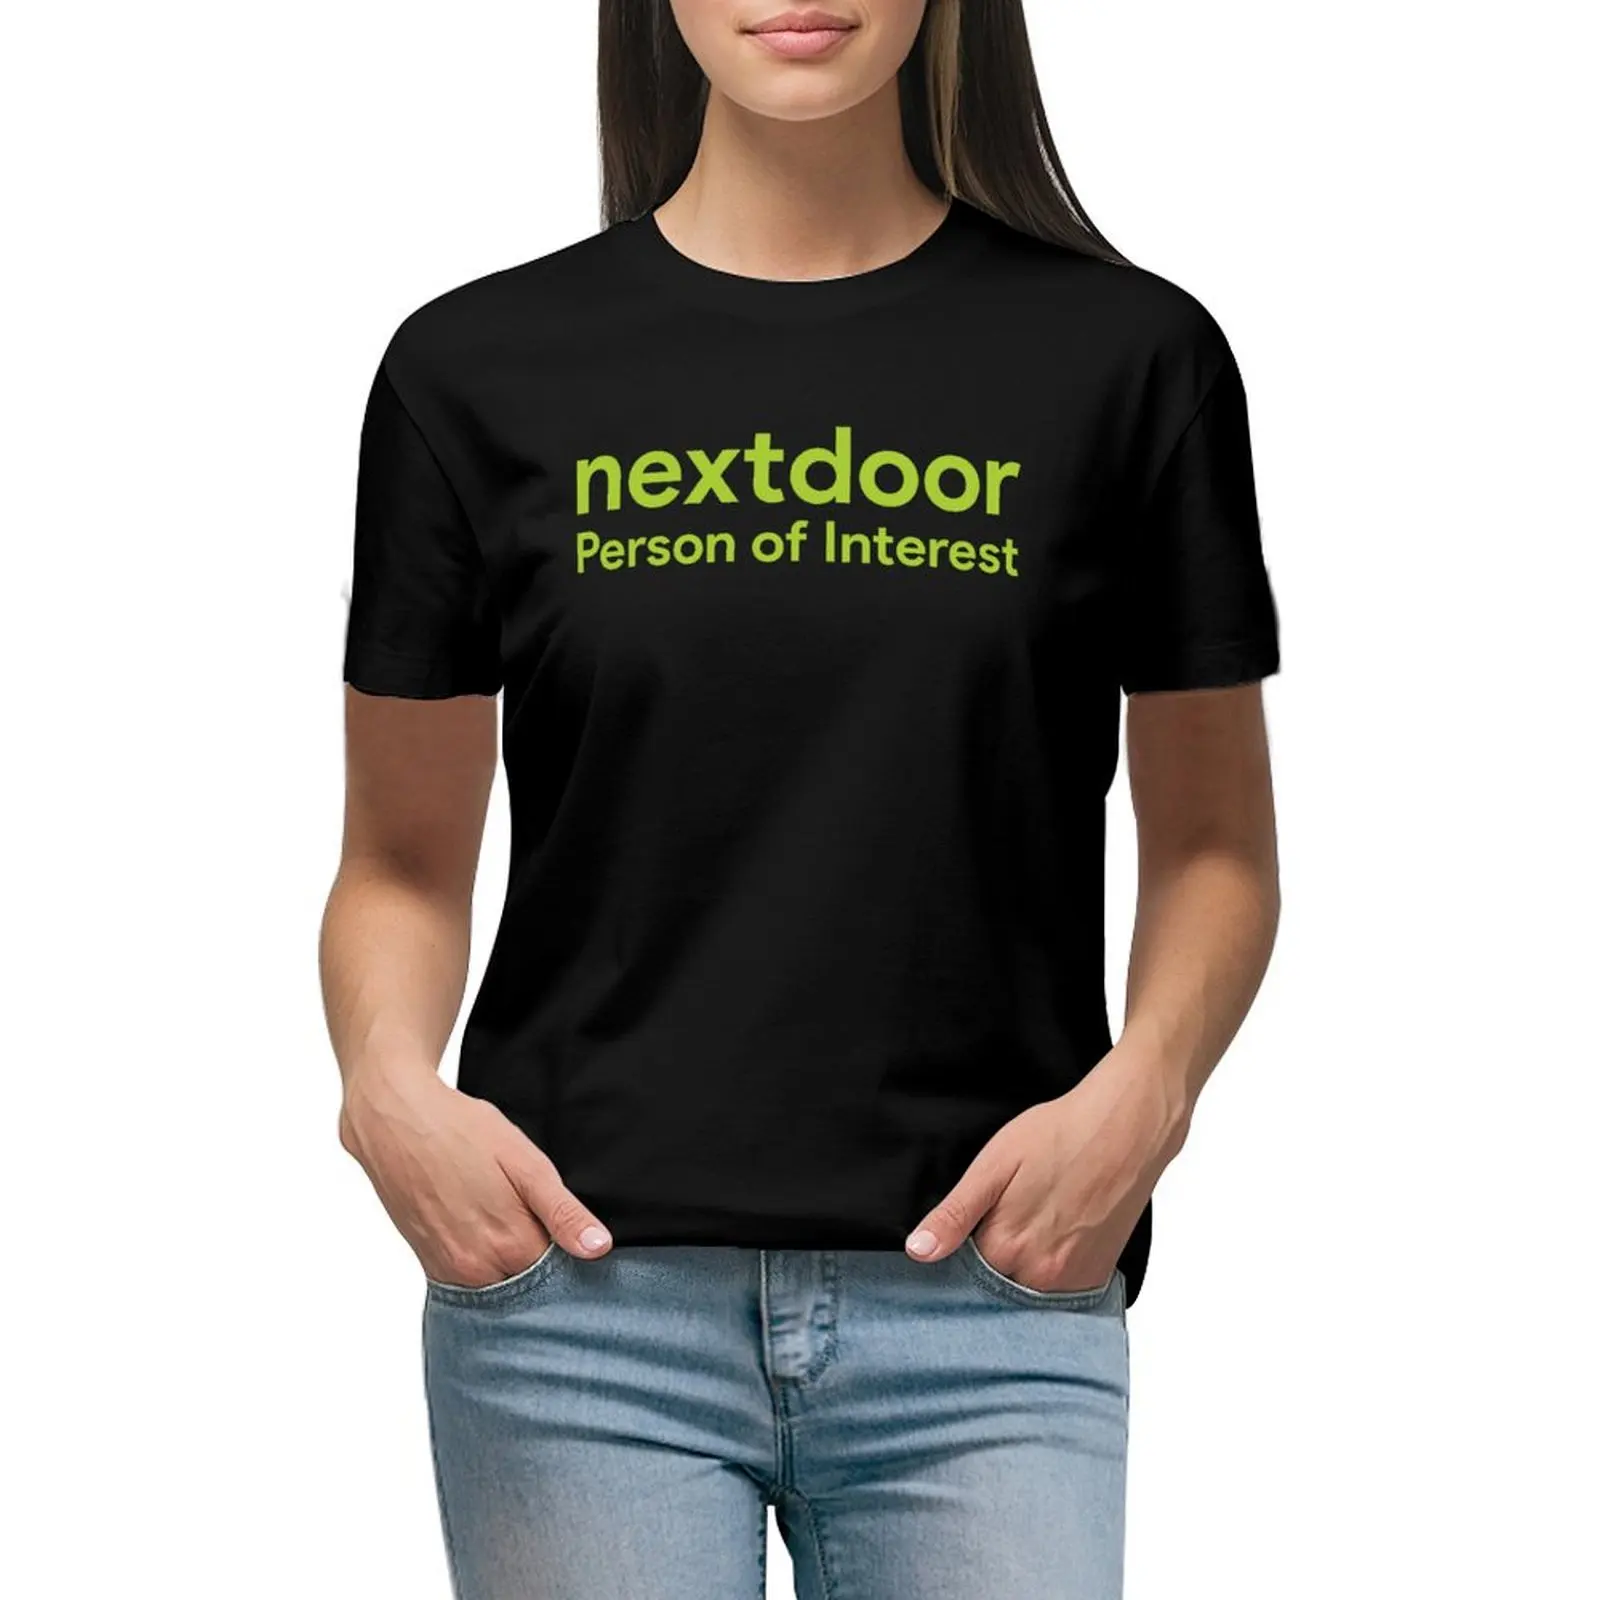 

Nextdoor person of interest T-shirt shirts graphic tees Female clothing plus size t shirts for Women loose fit